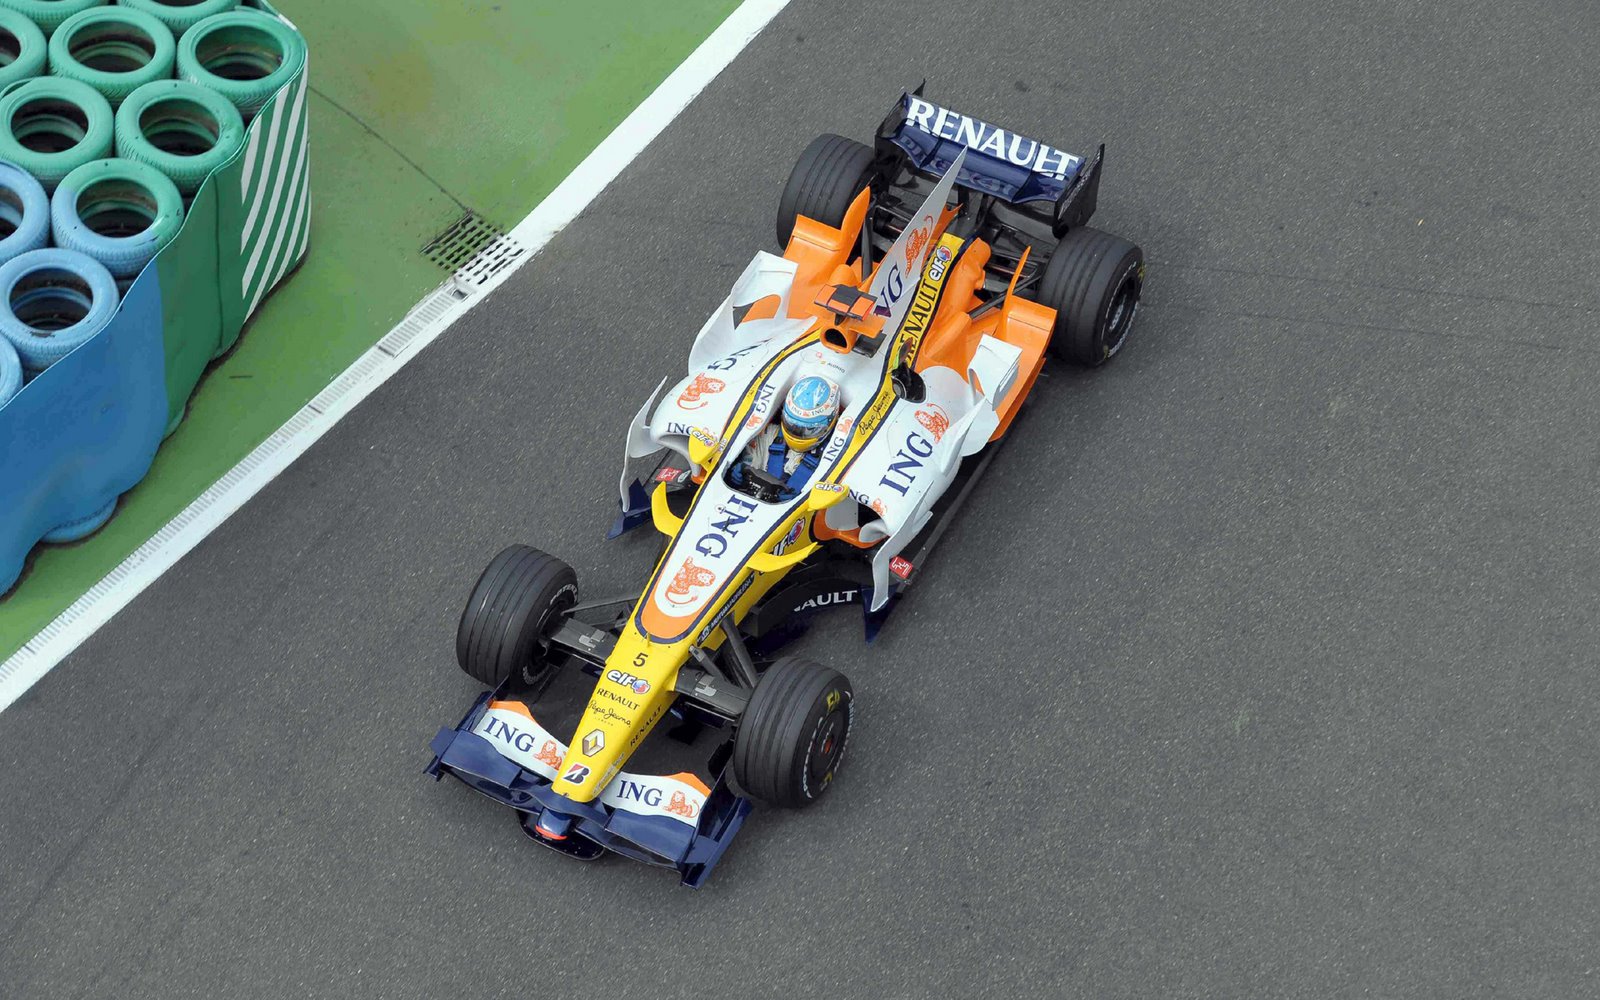 [Fernando+Alonso+Renault+Saturday+Qualifying+session+France+Magny+Cours,+F1+2008+11.jpg]